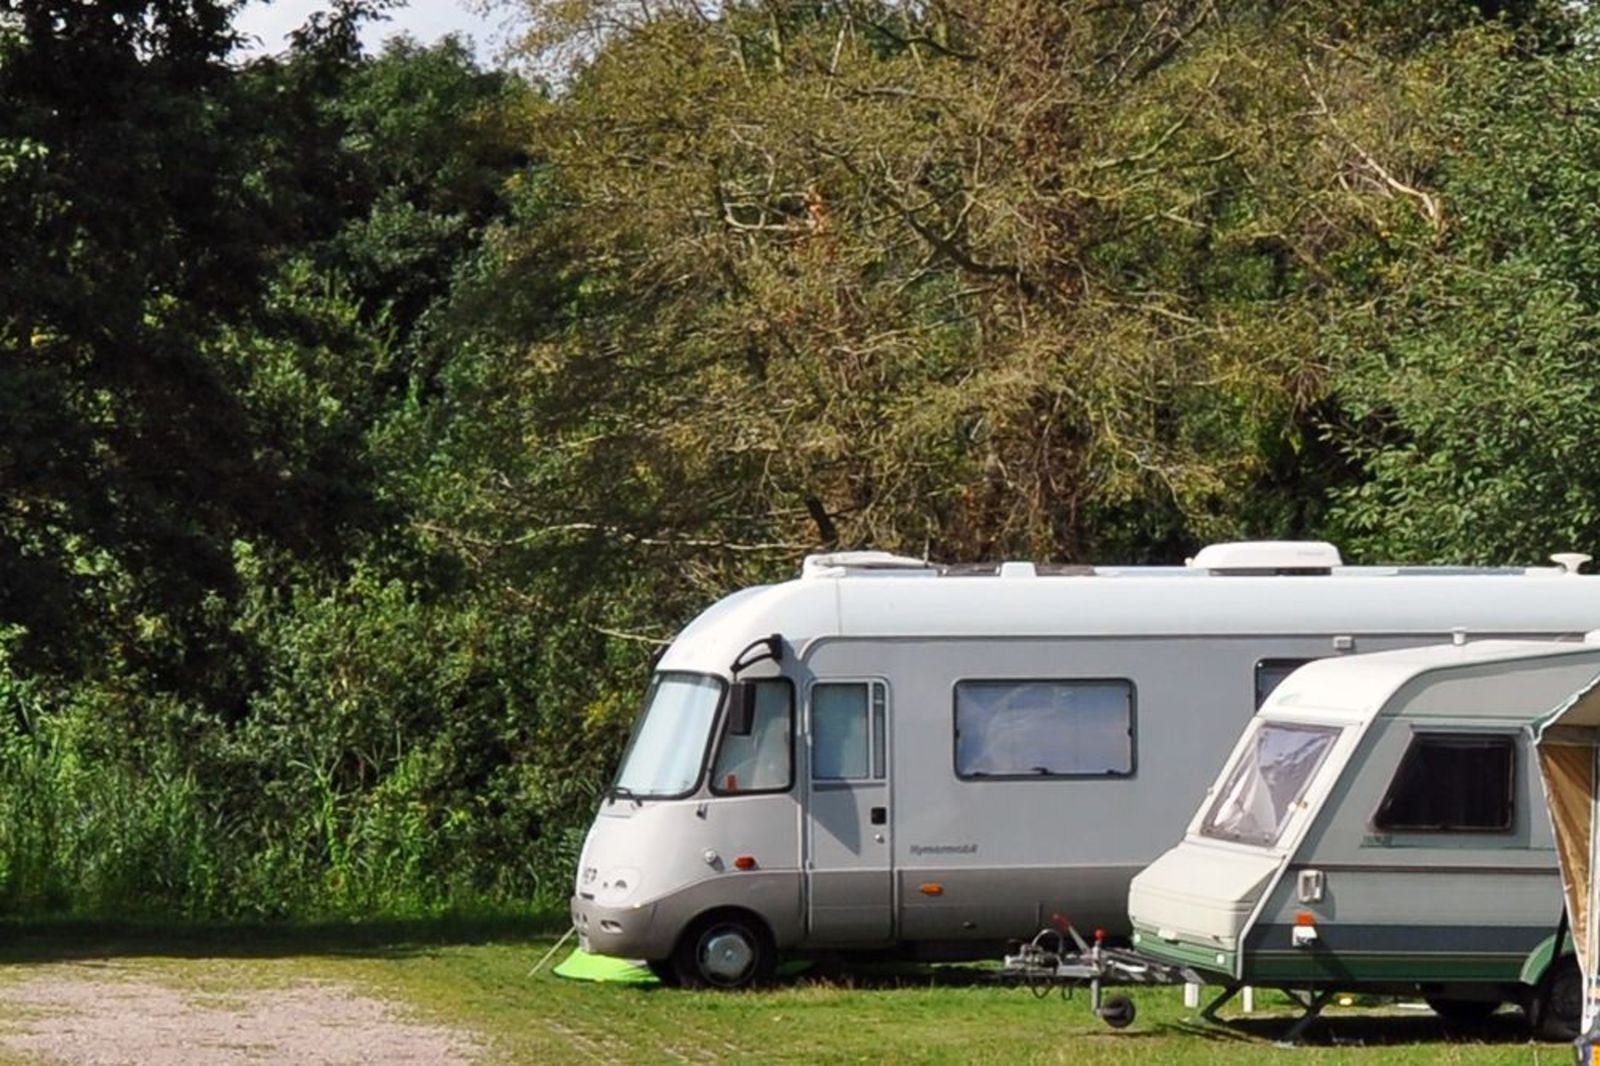 Two motorhome/caravan pitches side by side on a corner